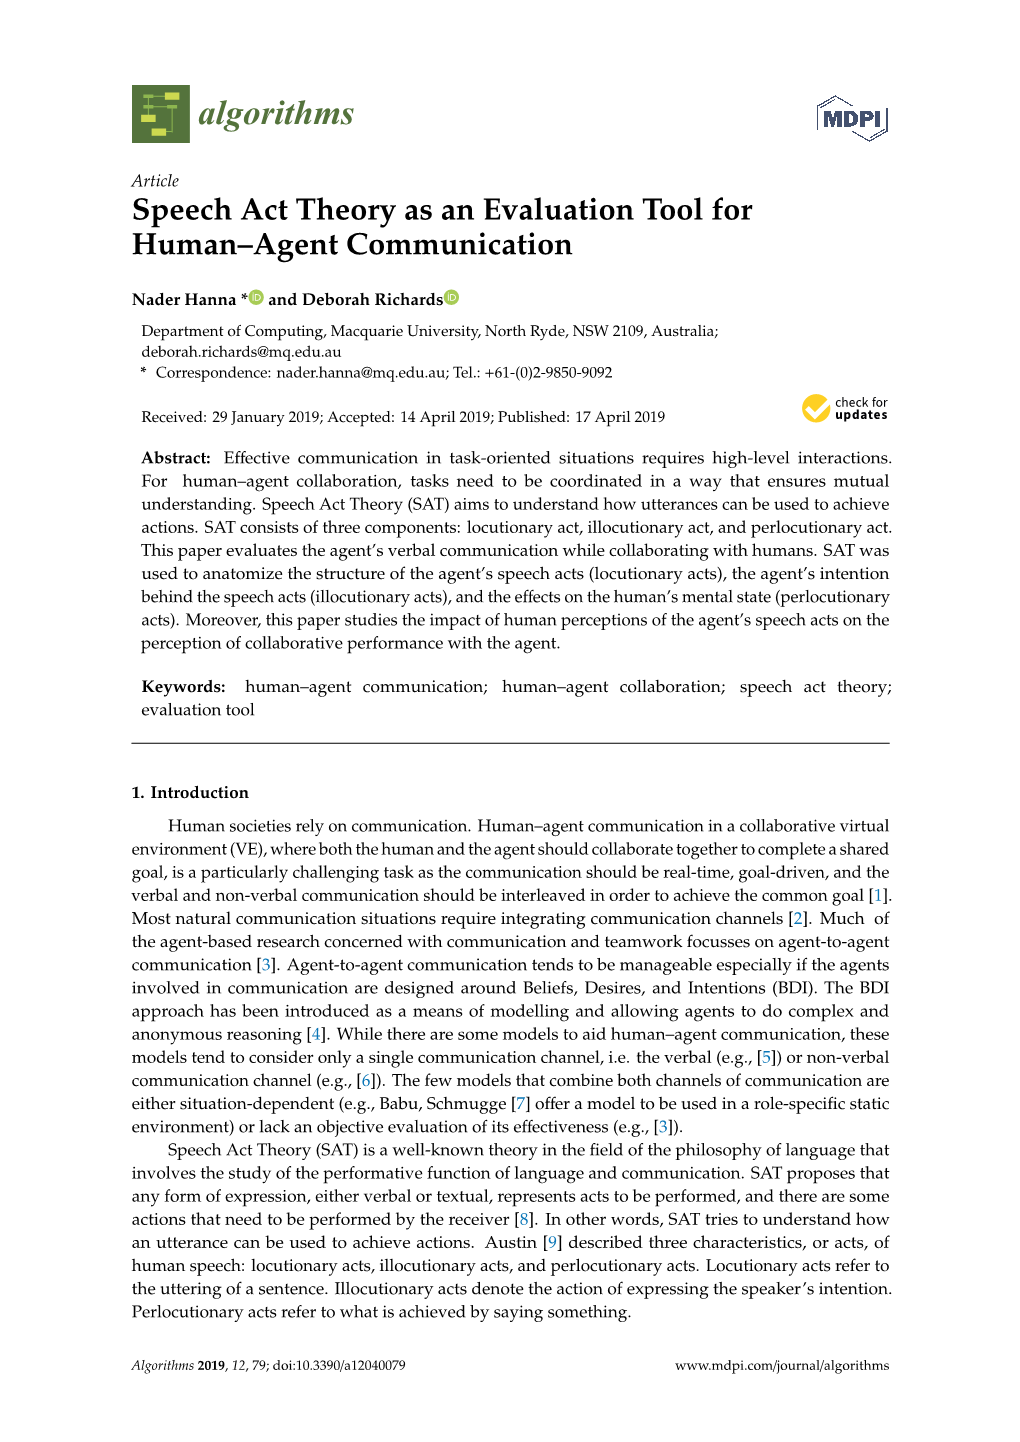 Speech Act Theory As an Evaluation Tool for Human–Agent Communication